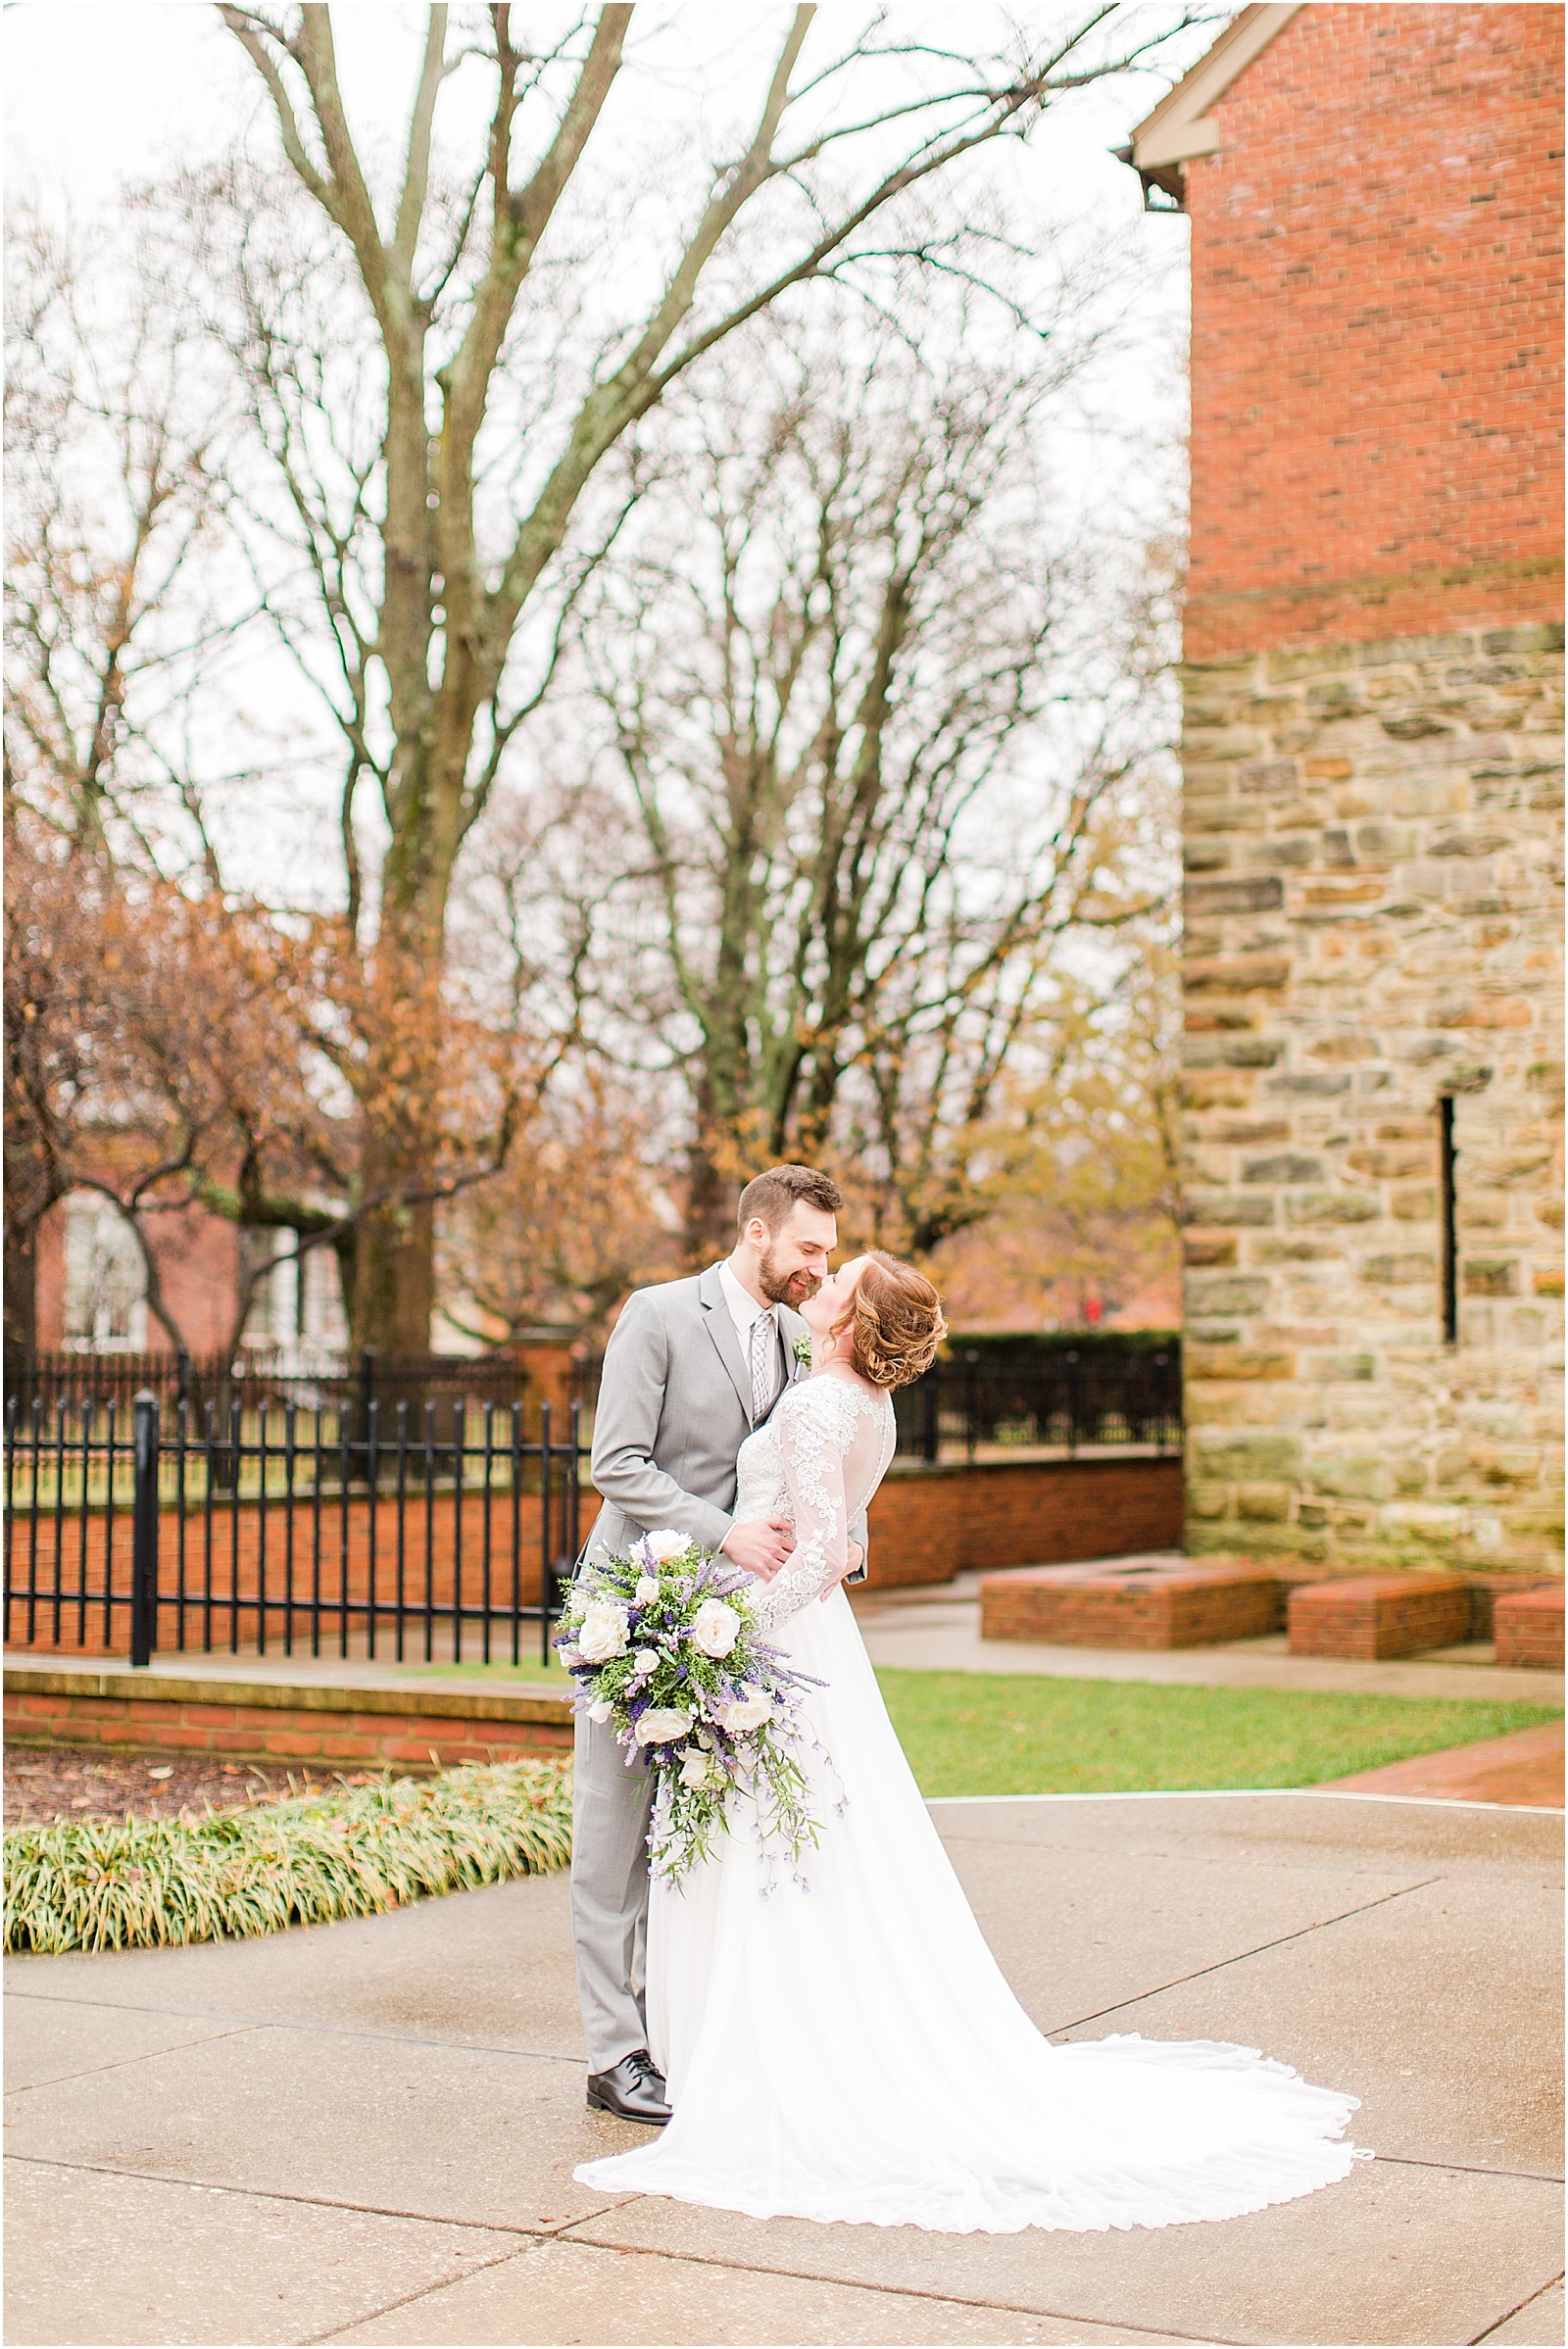 Amy and Logan | A Rainy New Harmony Indiana wedding | Bret and BRandie Photography | Bret and Brandie Photography | 0048.jpg